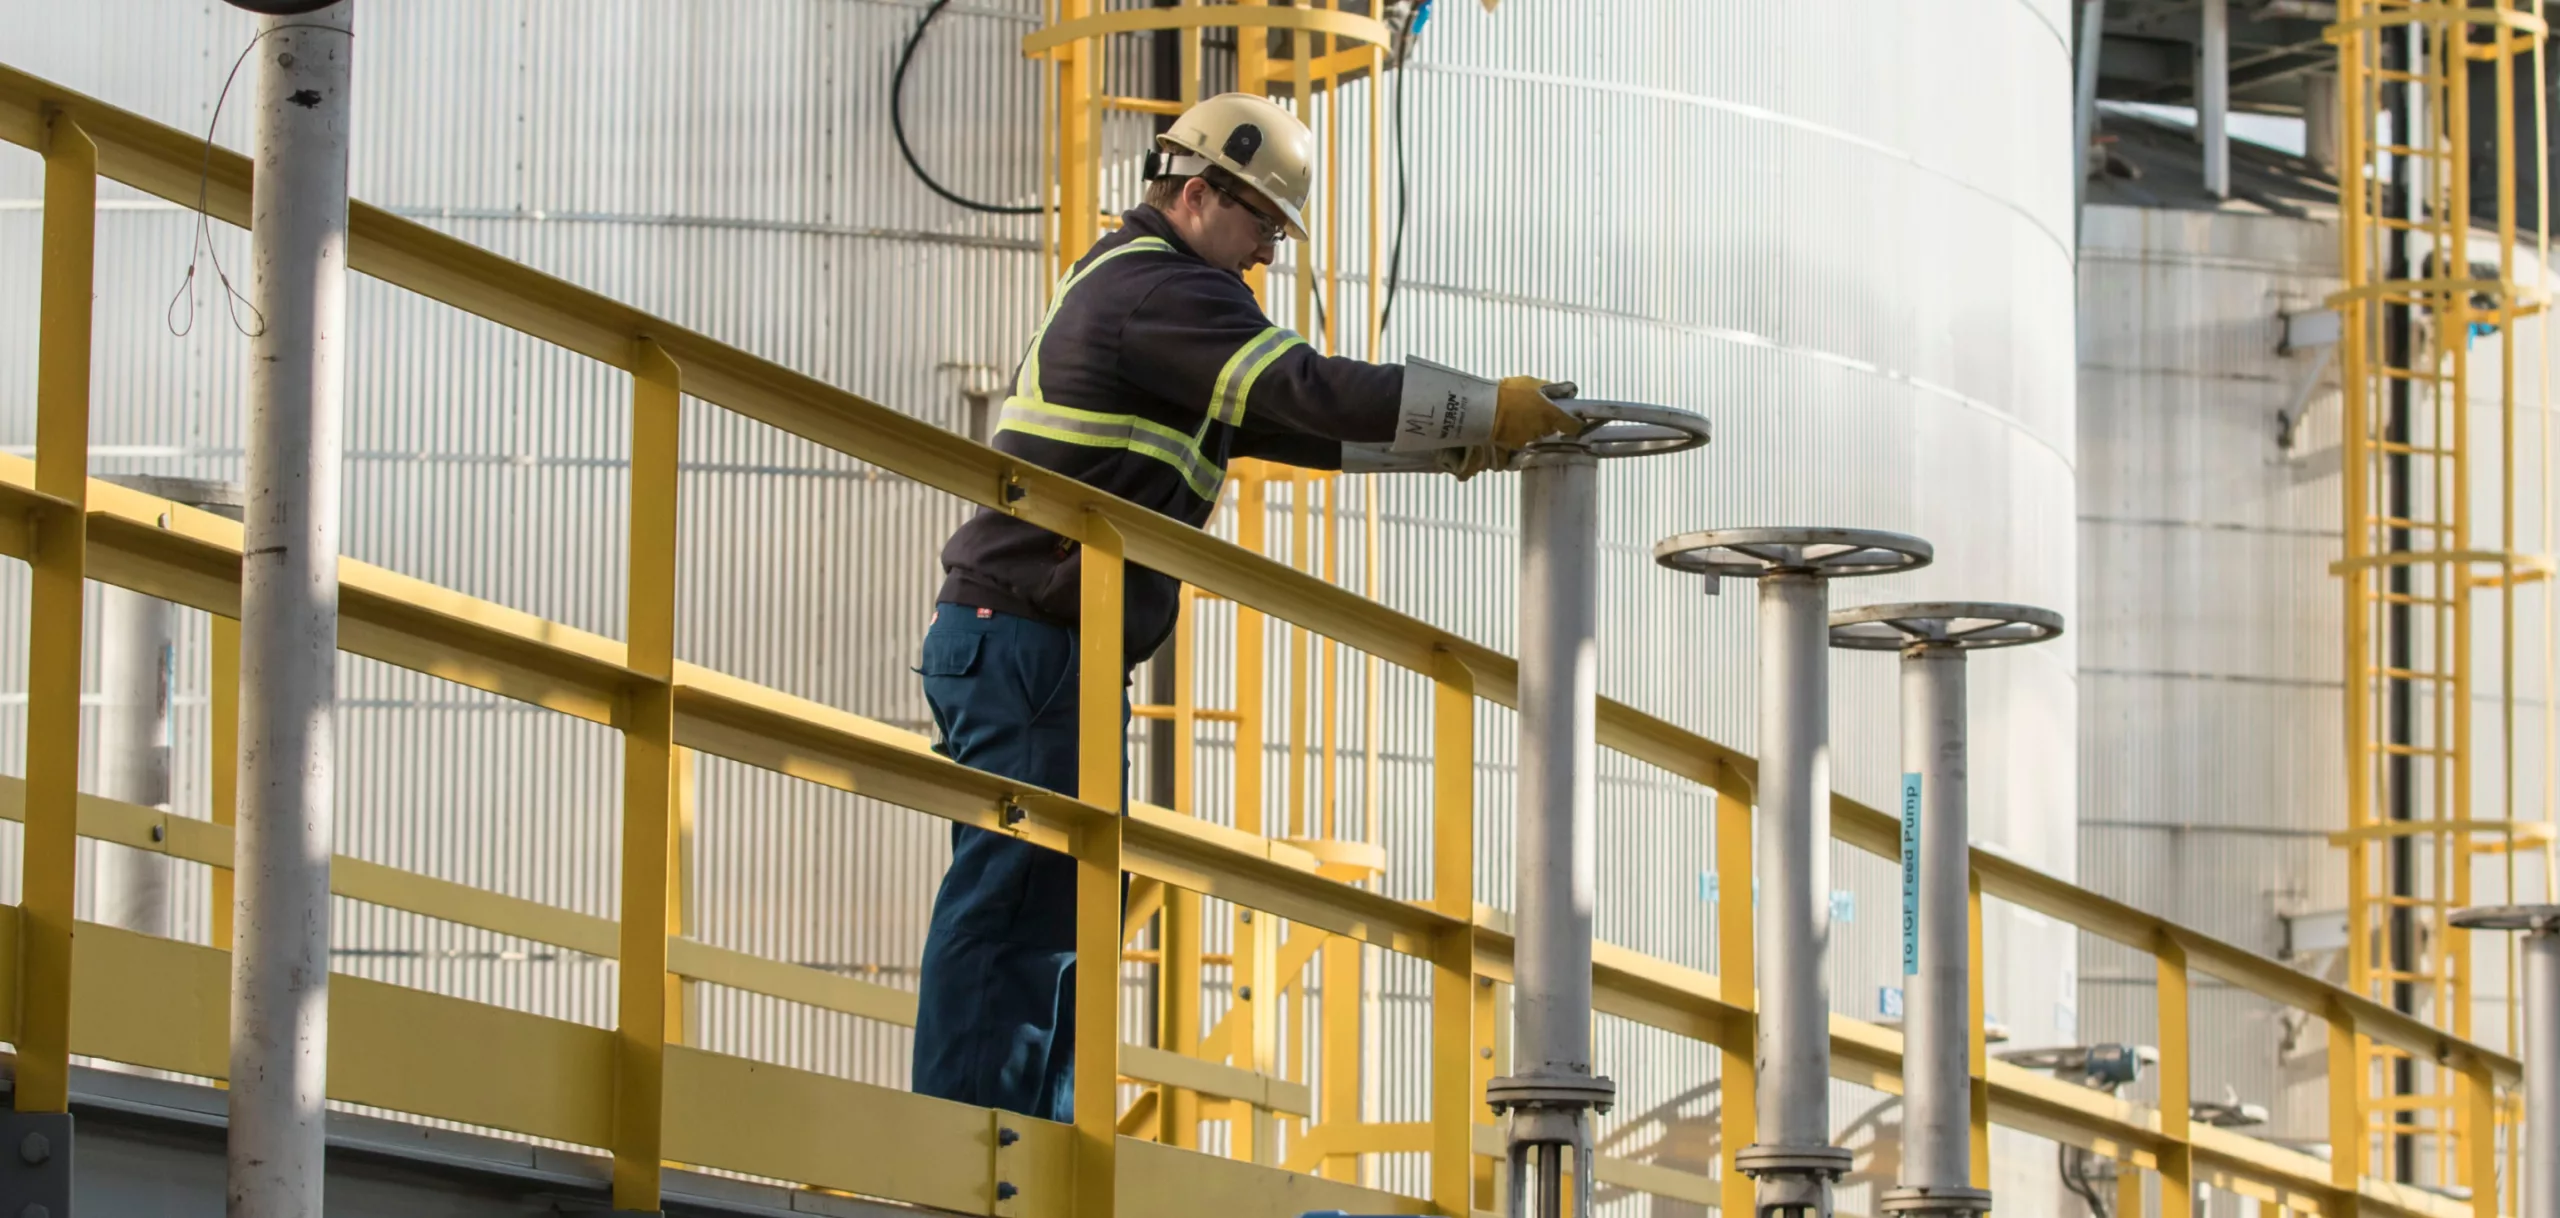 Person working outdoors at an operating facility, wearing a reflective black jacket, white hard hat and protective gloves.